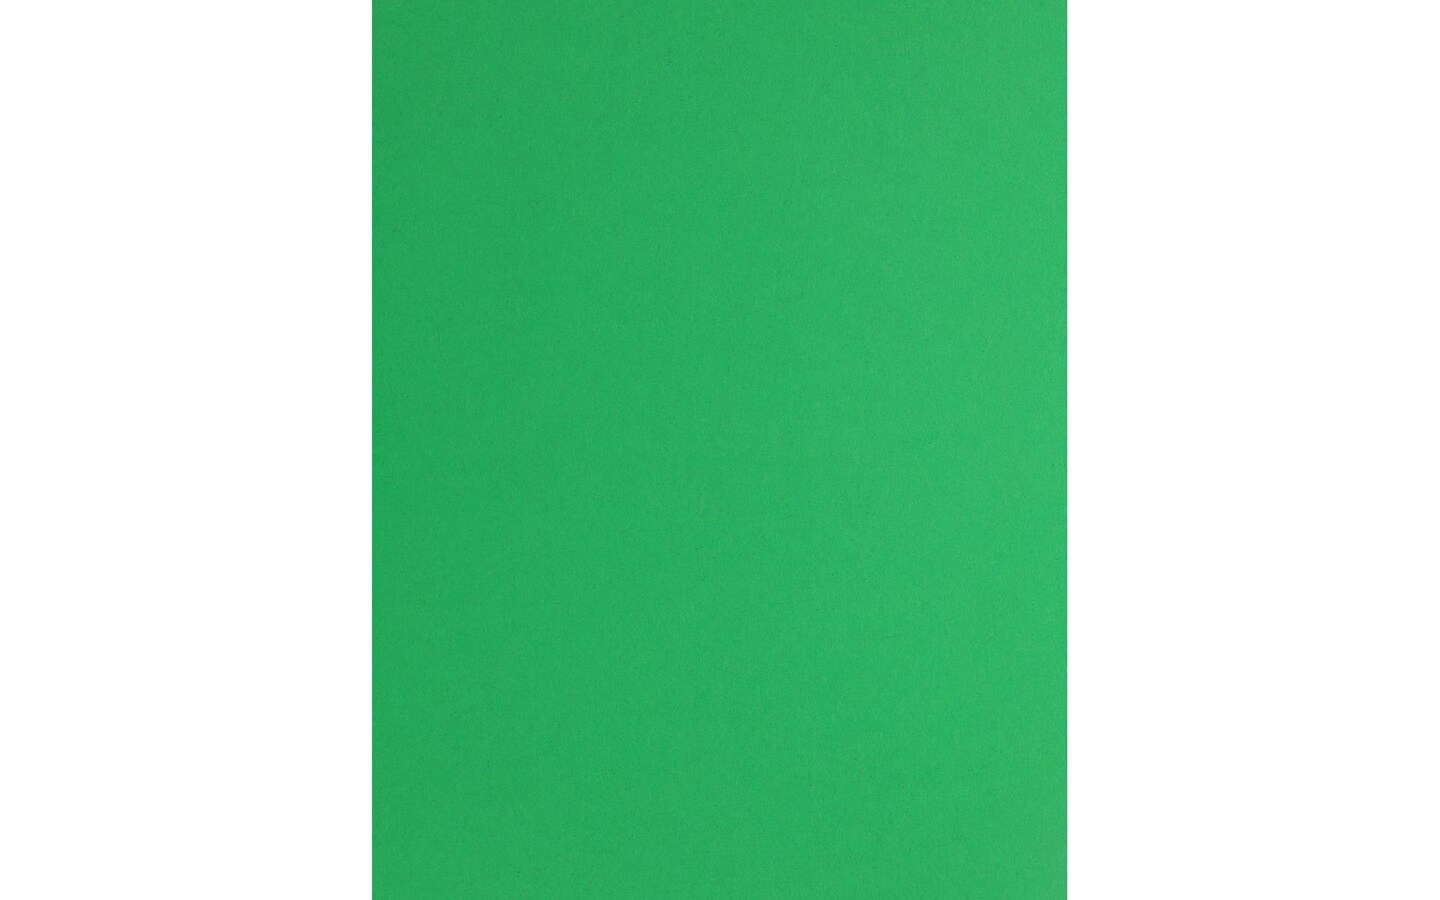 PA Paper Accents Smooth Cardstock 8.5 x 11 Sage Green, 65lb colored  cardstock paper for card making, scrapbooking, printing, quilling and  crafts